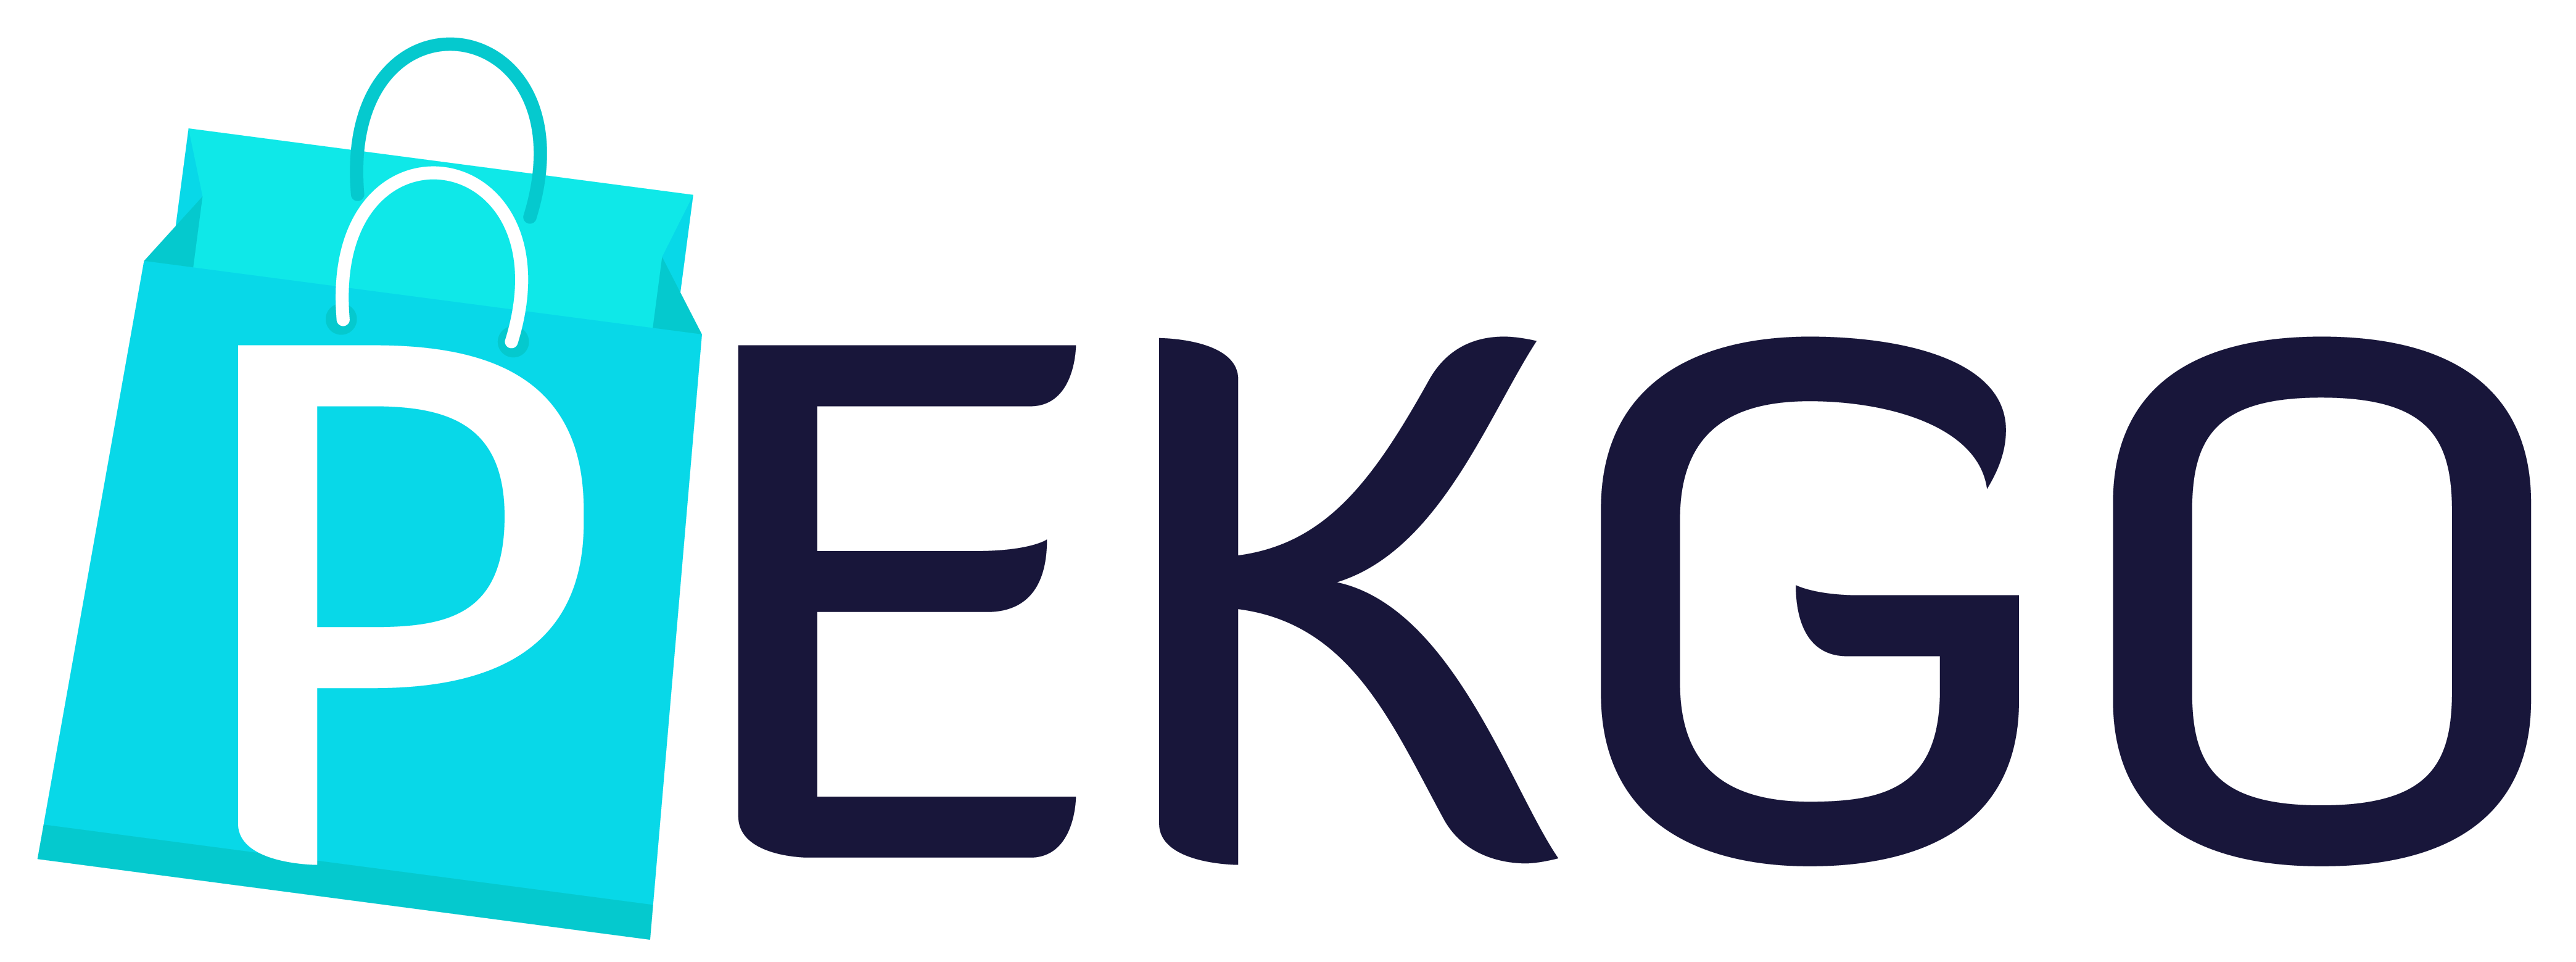 PekGo Email Marketing Services